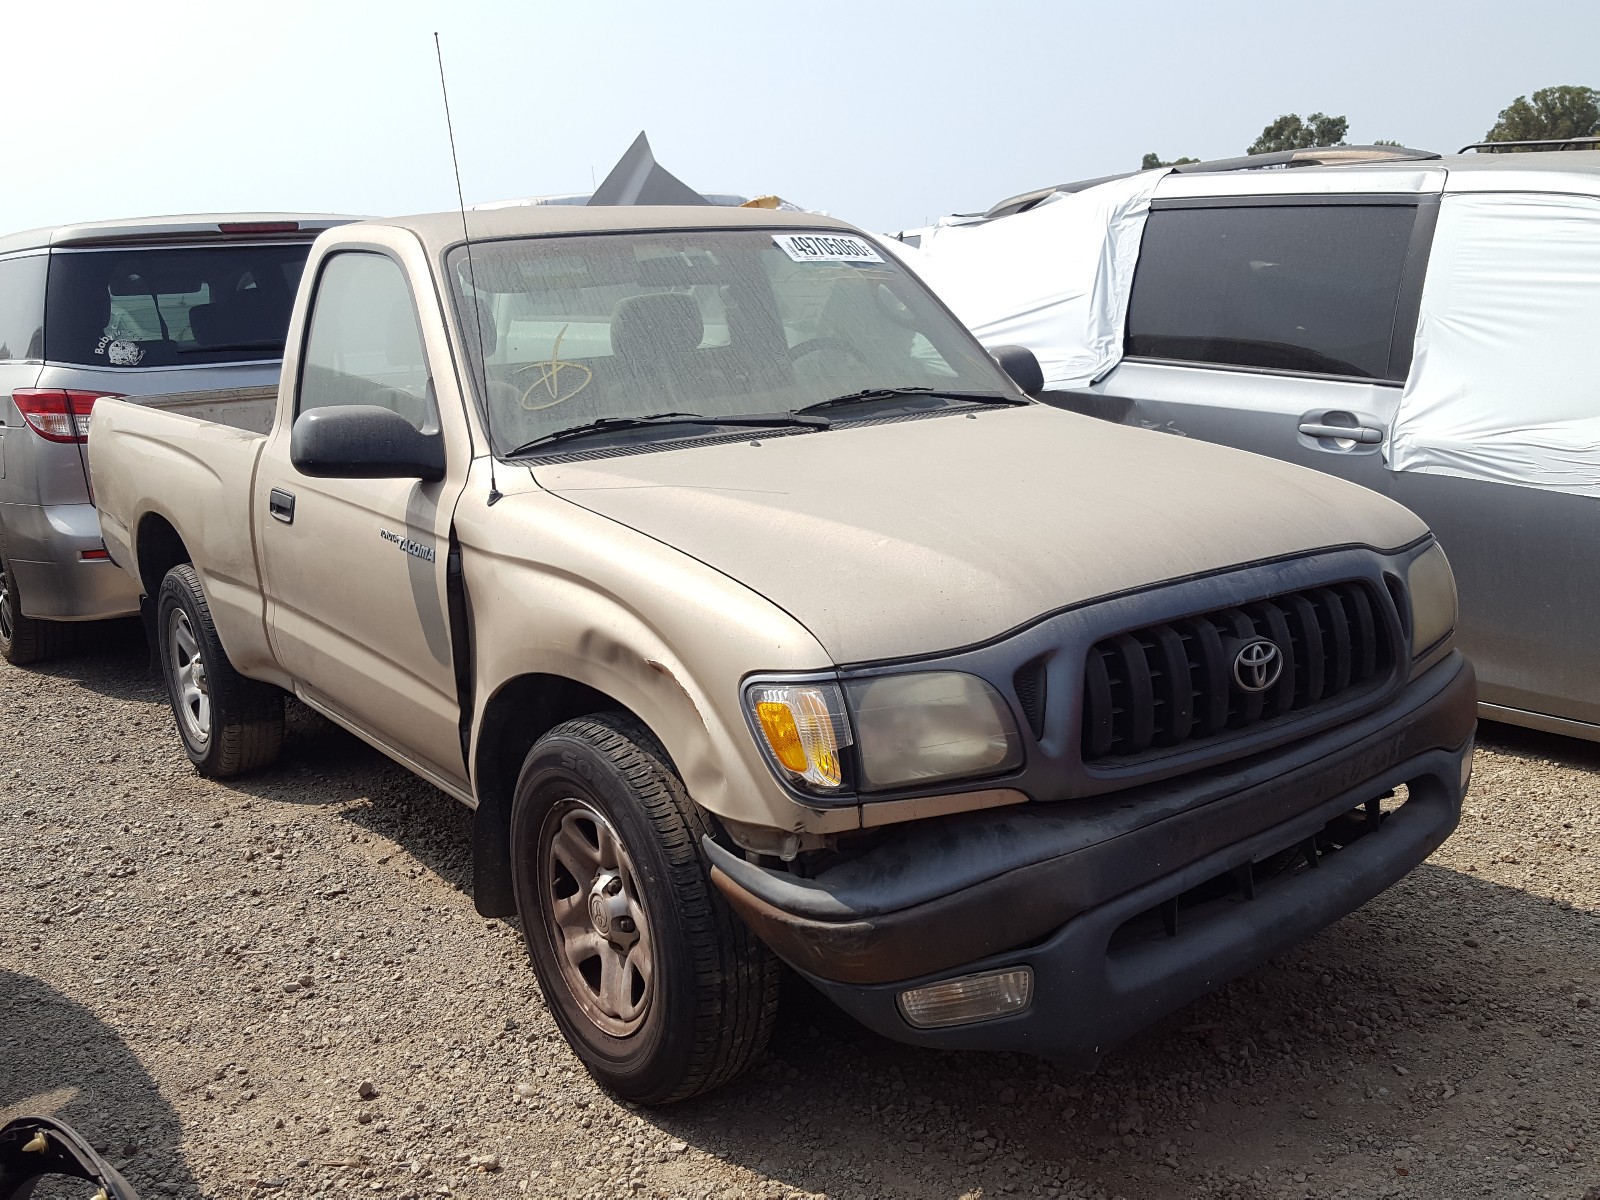 2004 Toyota Tacoma For Sale At Copart Hayward Ca Lot 49705060 Salvagereseller Com